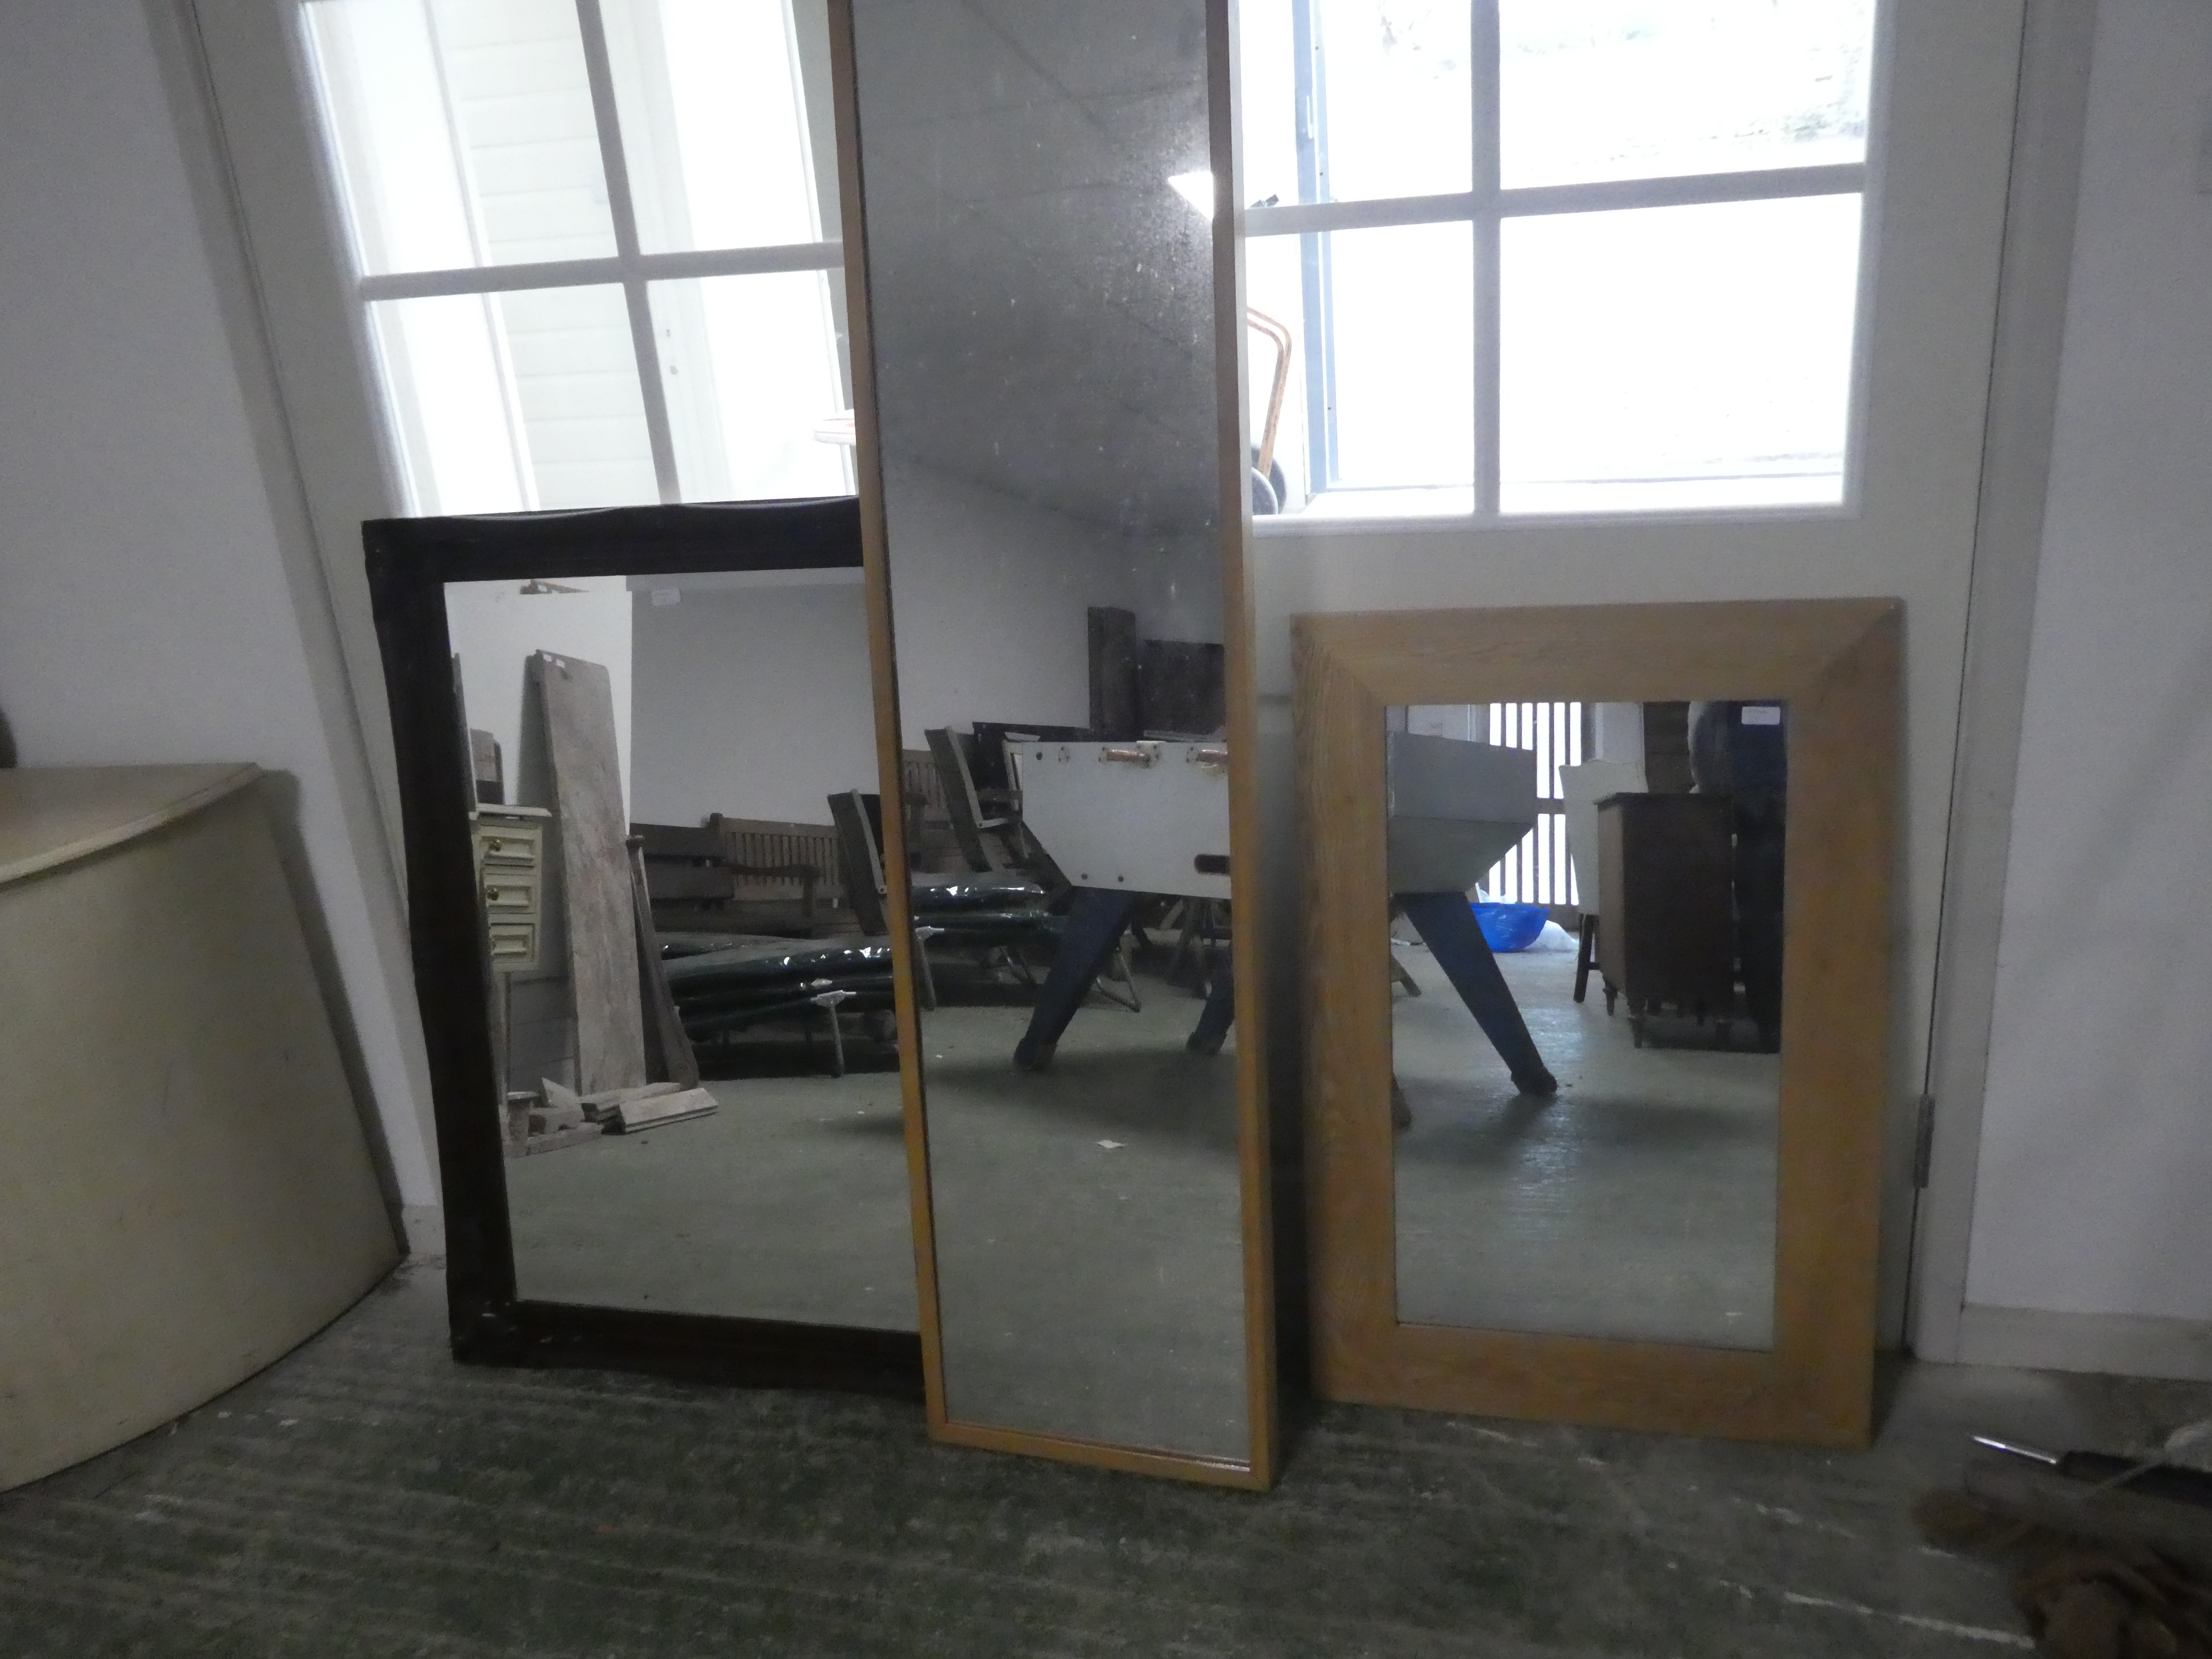 3 Mirrors of various sizes